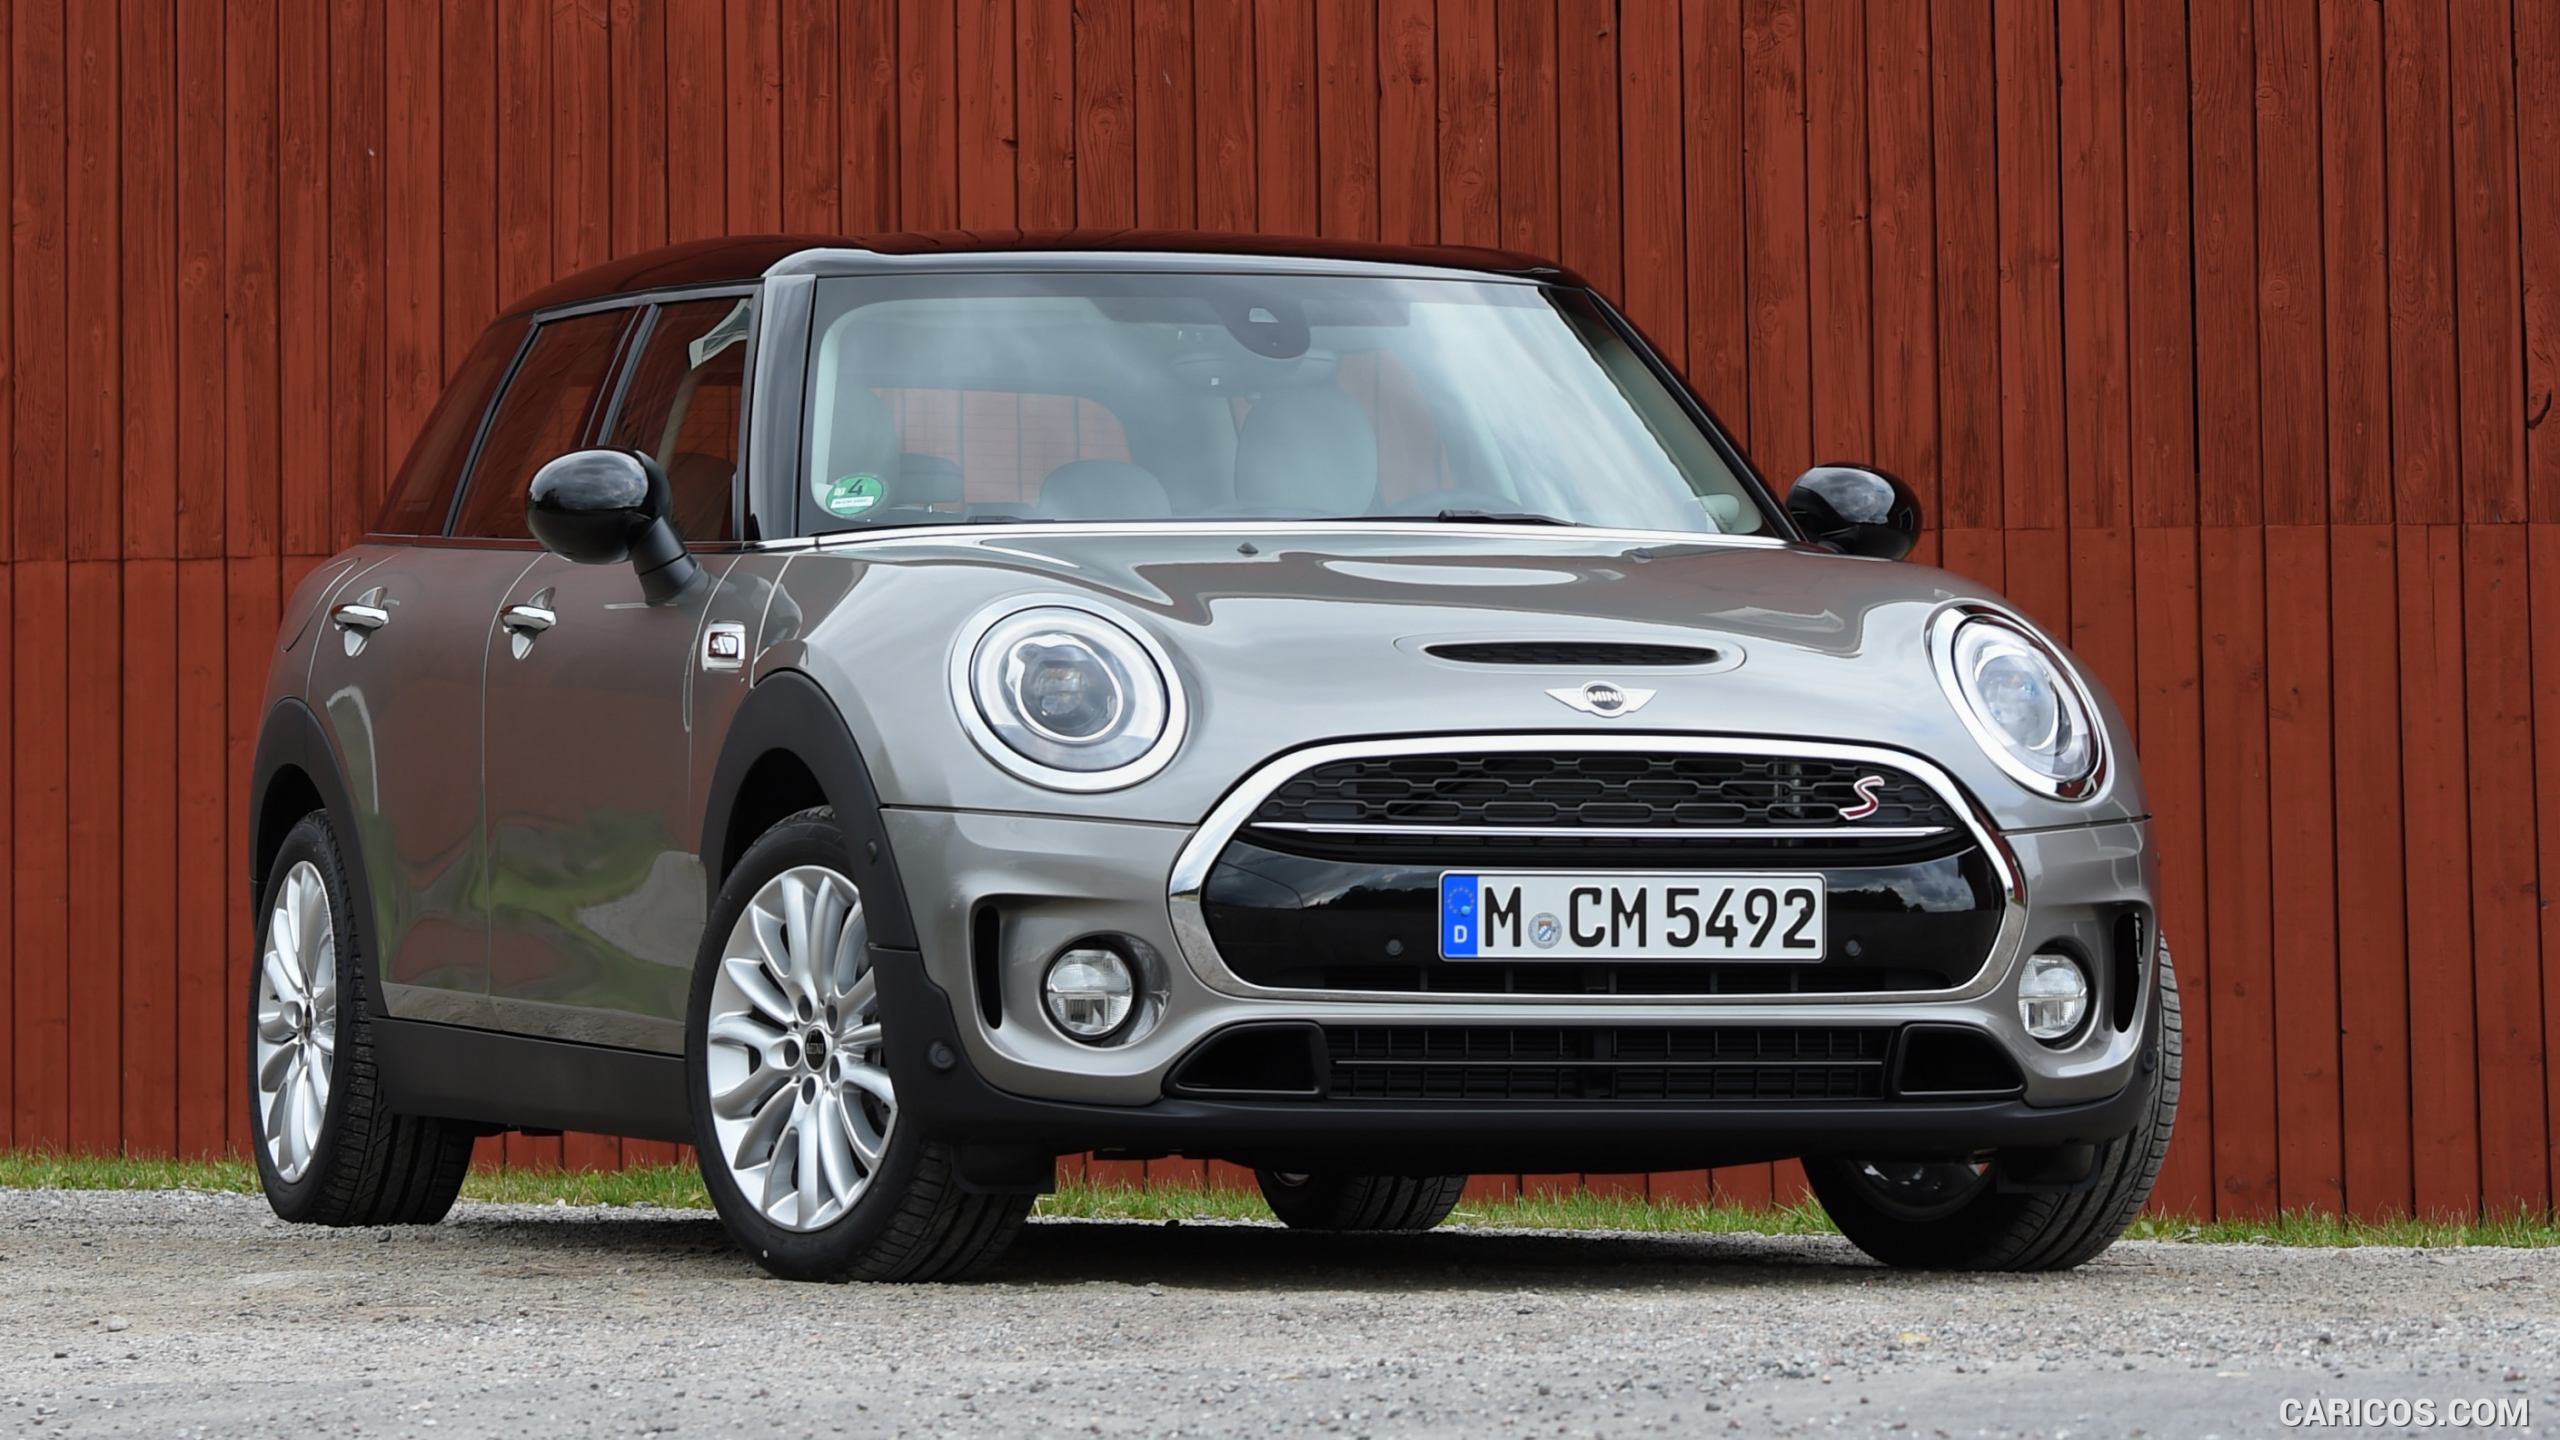 2016 MINI Cooper S Clubman in Metallic Melting Silver - Front, #203 of 380